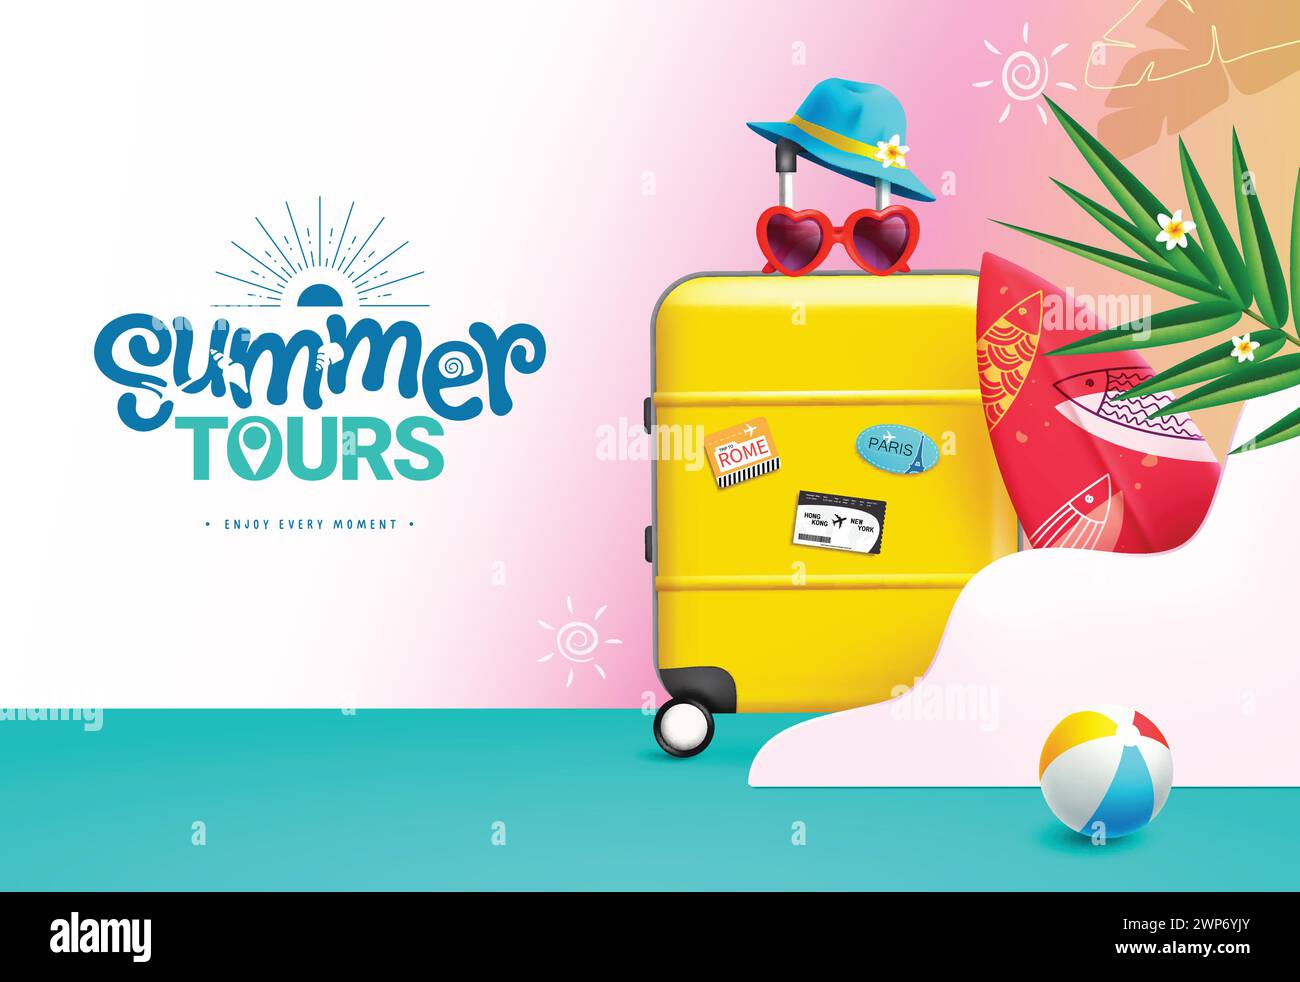 Summer tours text vector design. Summer tours travel promotion with yellow luggage bag, surfboard and sunglasses for holiday season background. Vector Stock Vector